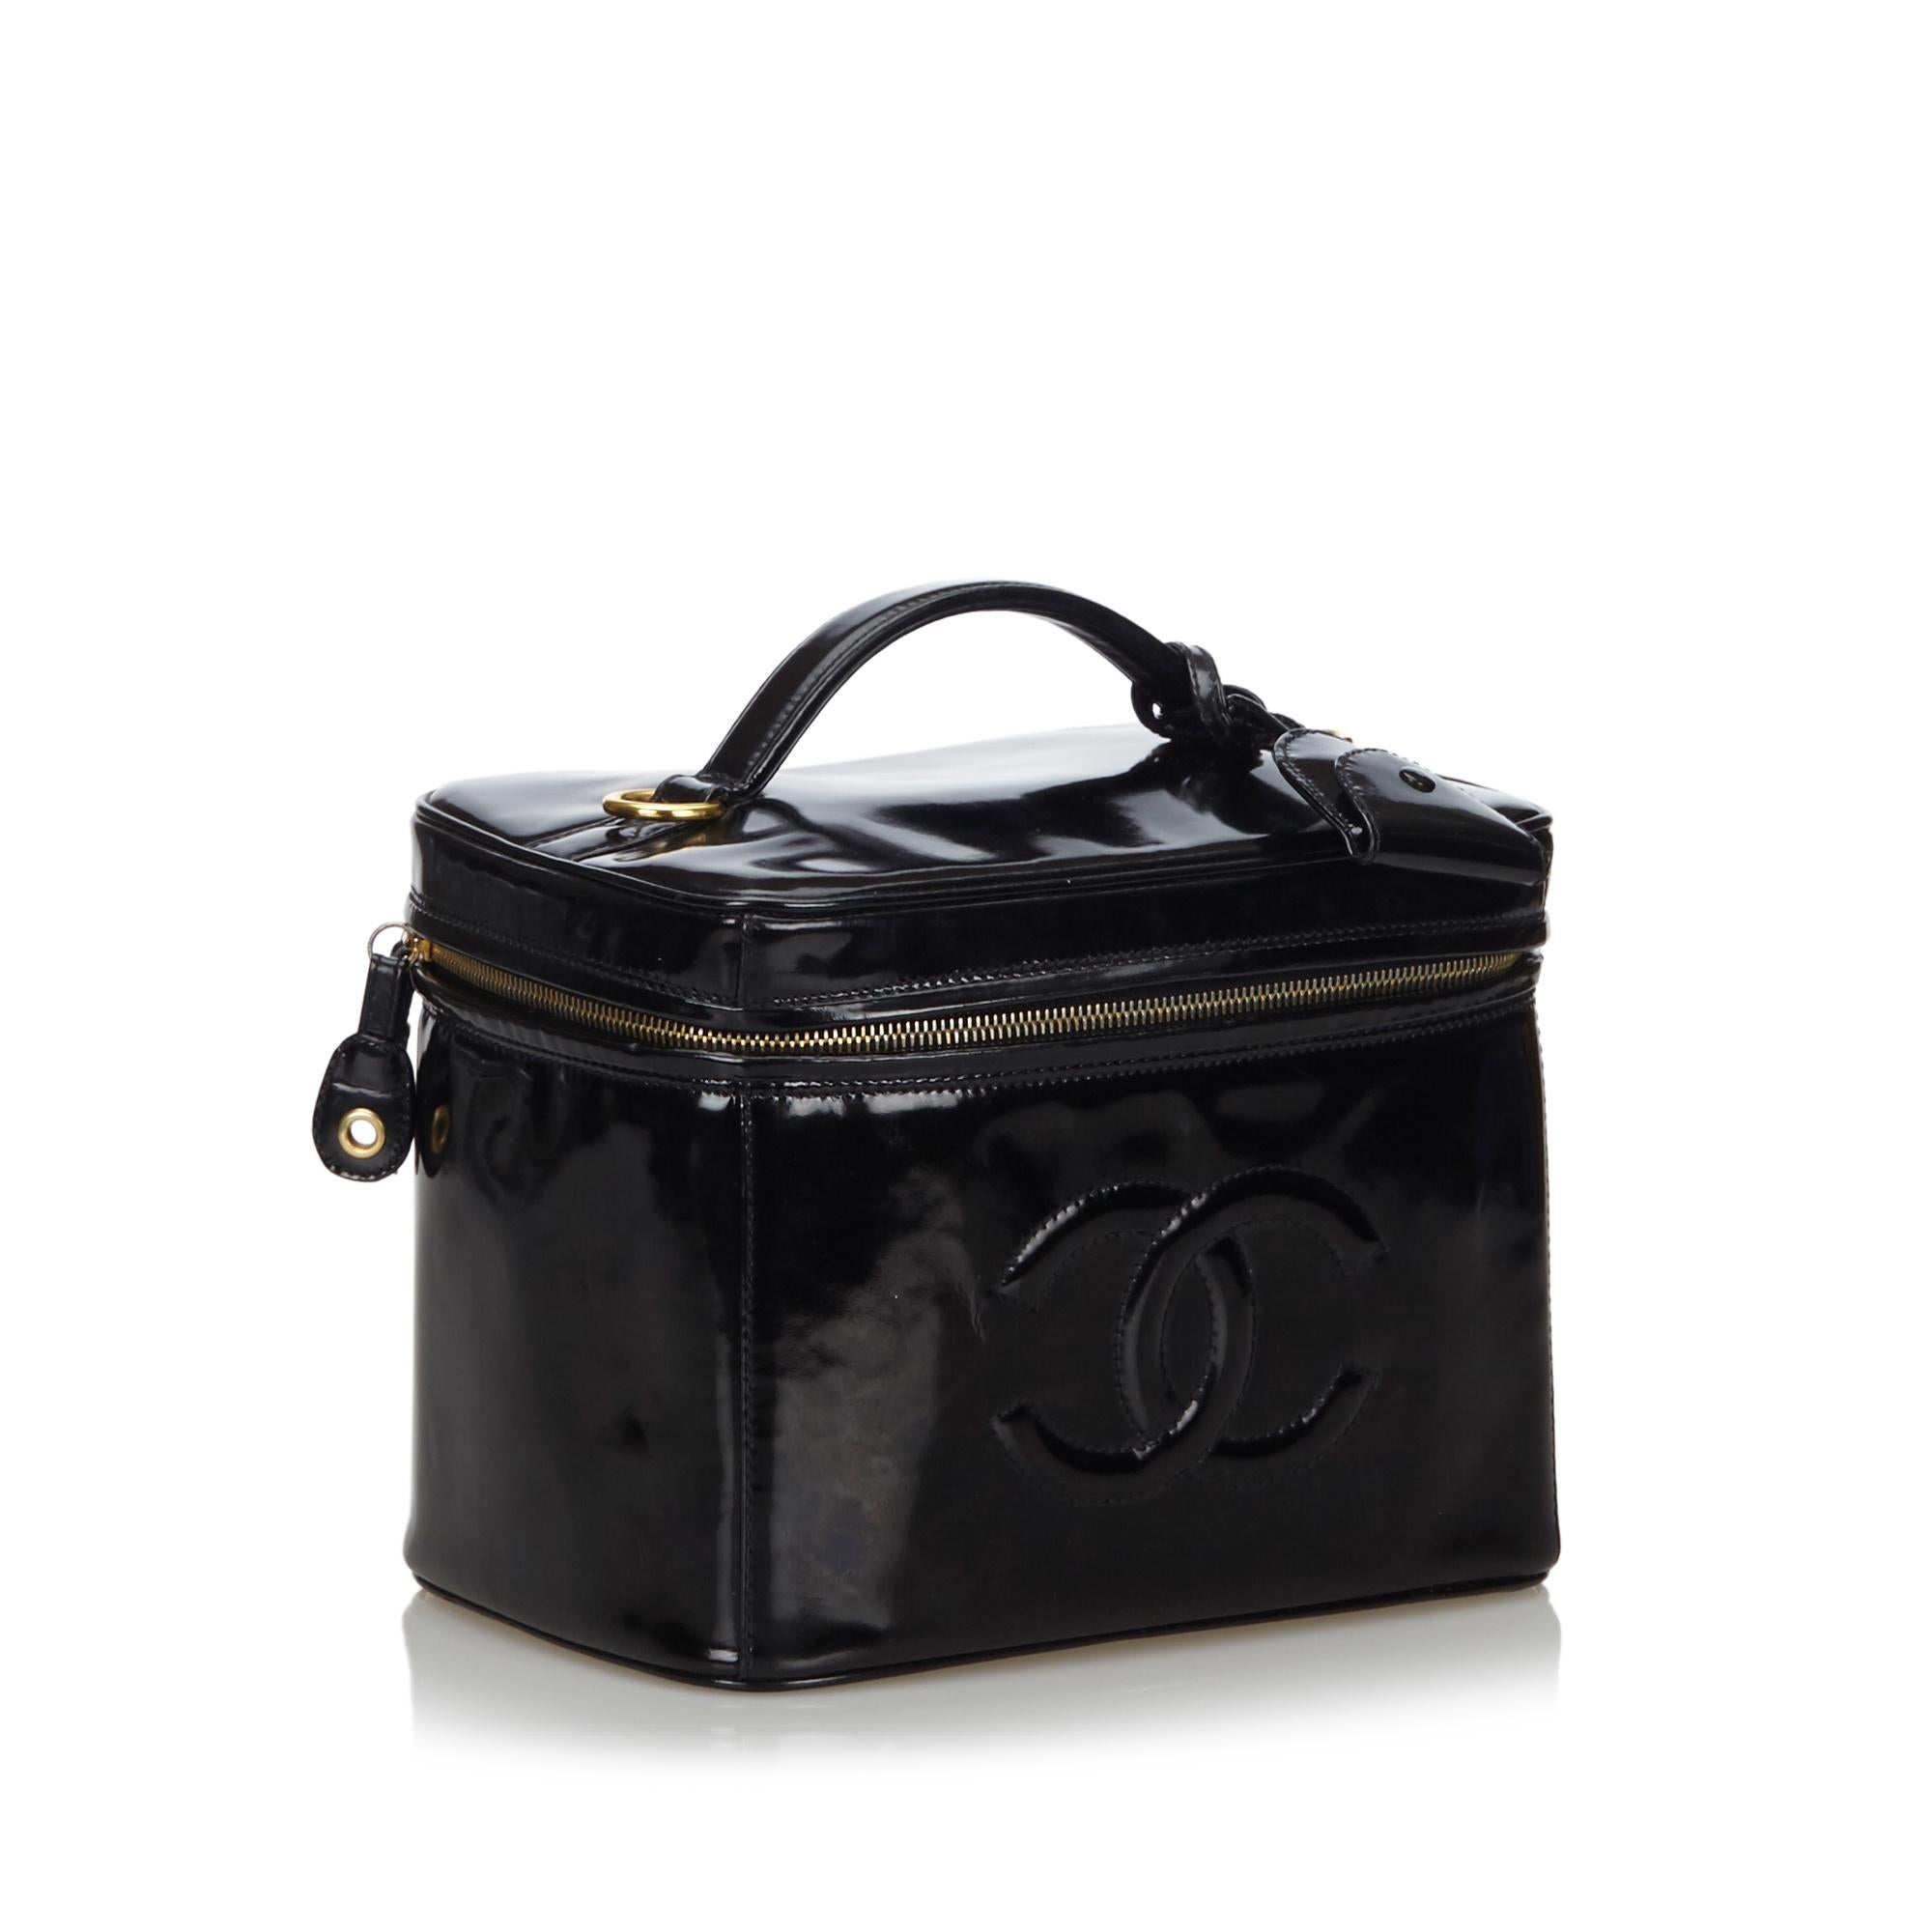 Chanel Vintage CC Patent Leather 2 Way Vanity Bag

This vanity bag features a patent leather body with interlocking Cs, a zip around closure, a flat top handle, a detachable flat leather strap, and interior slip pockets. 

Approx. 18cm x 22cm x 15cm